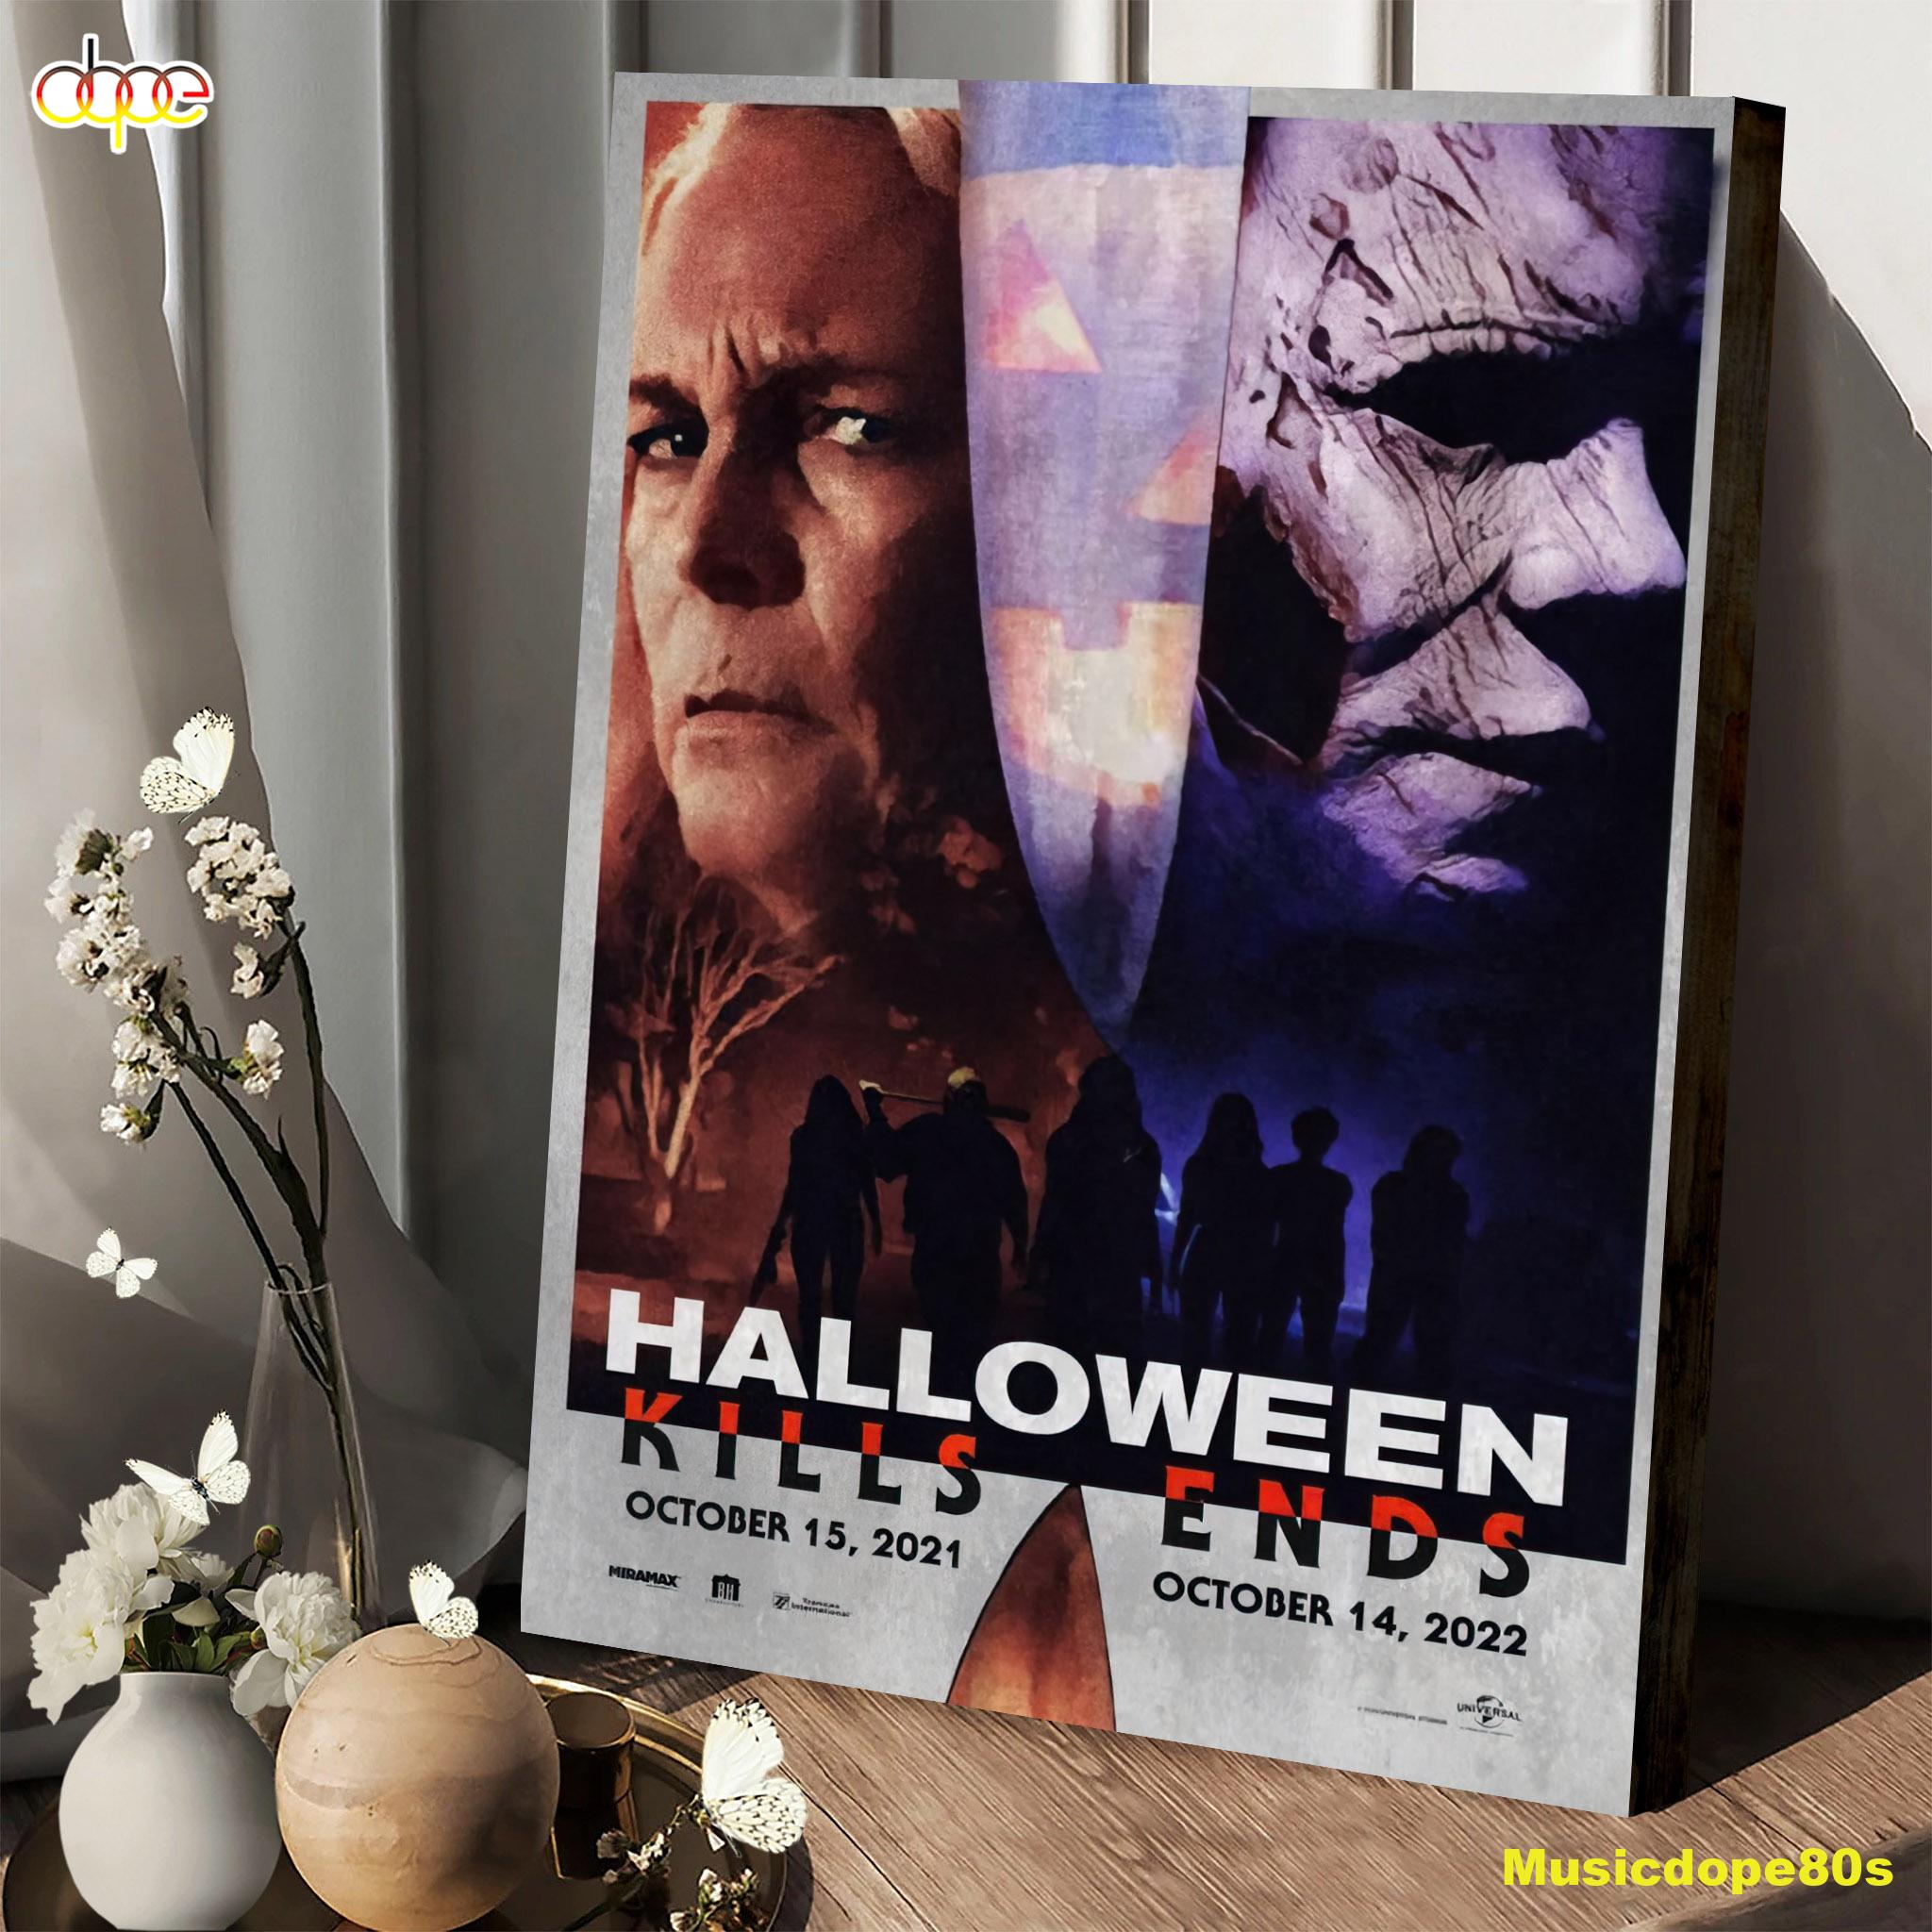 Halloween Kills 2021 And Halloween Ends 2022 Movie Poster